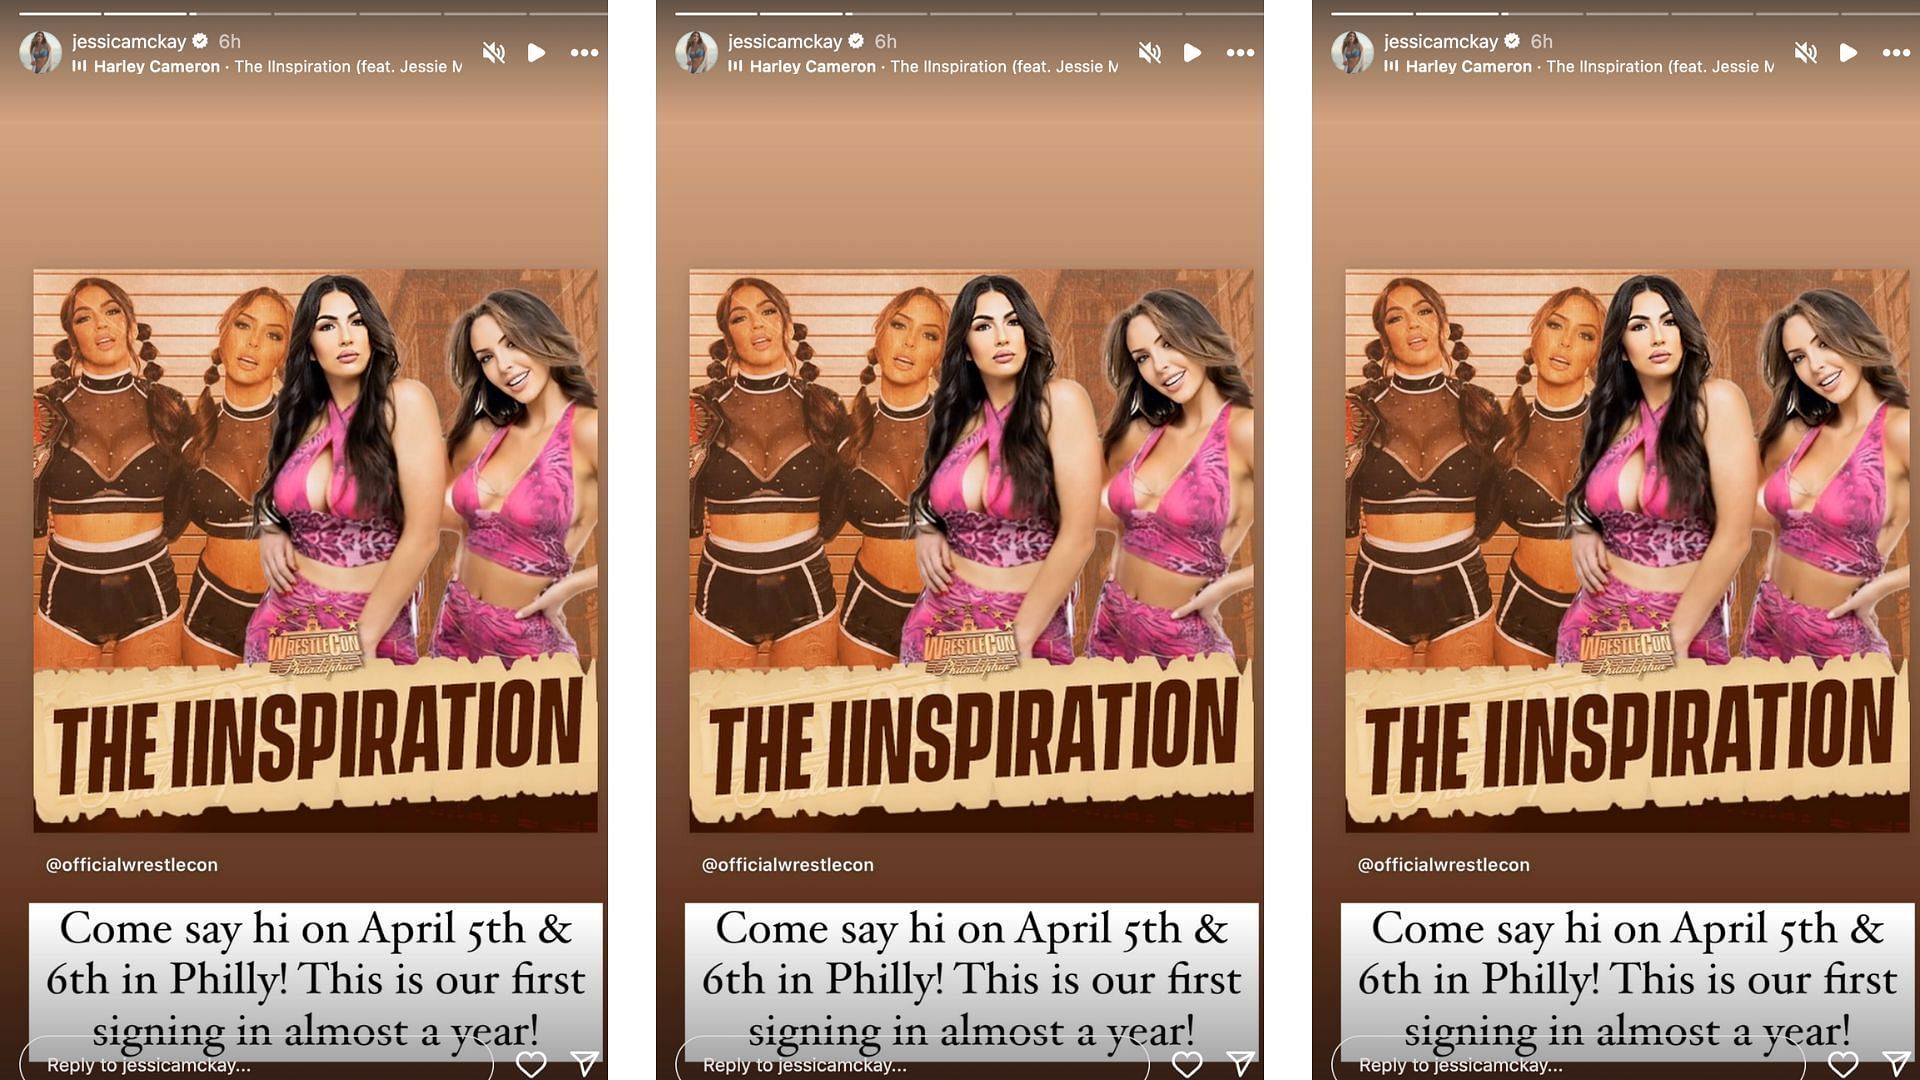 Screengrab of Jessica McKay (Billie Kay) post announcing The IInspiration will be at WrestleCon